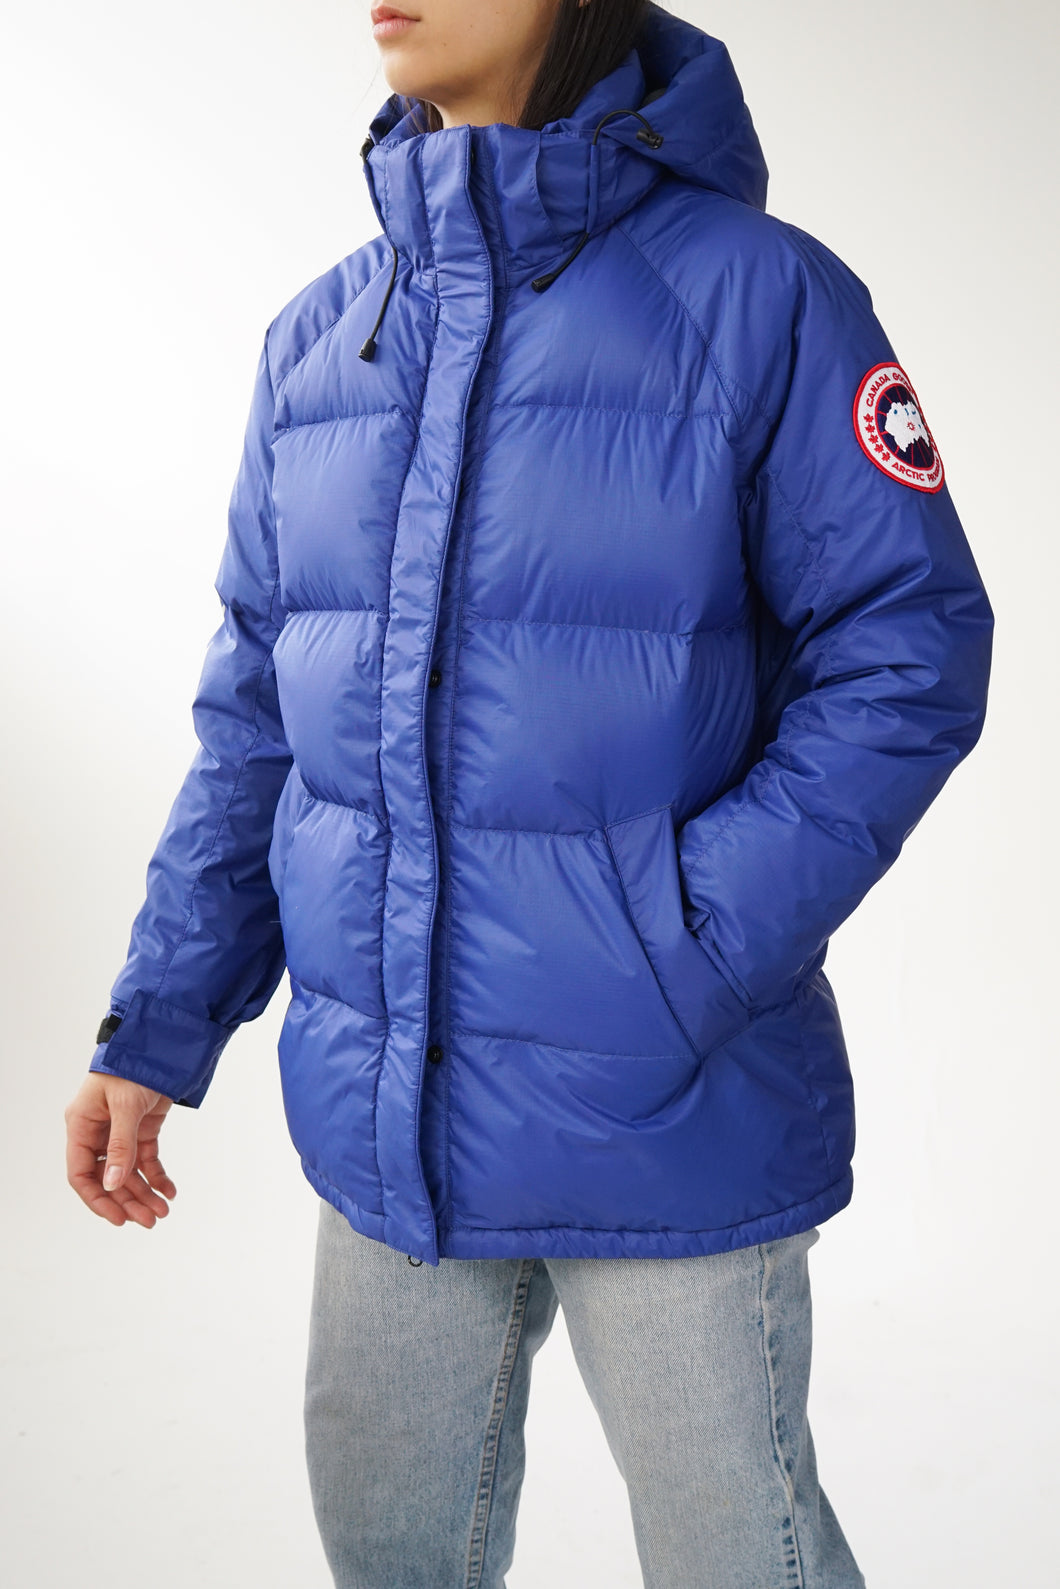 Canada Goose Approach down parka jacket in blue size S